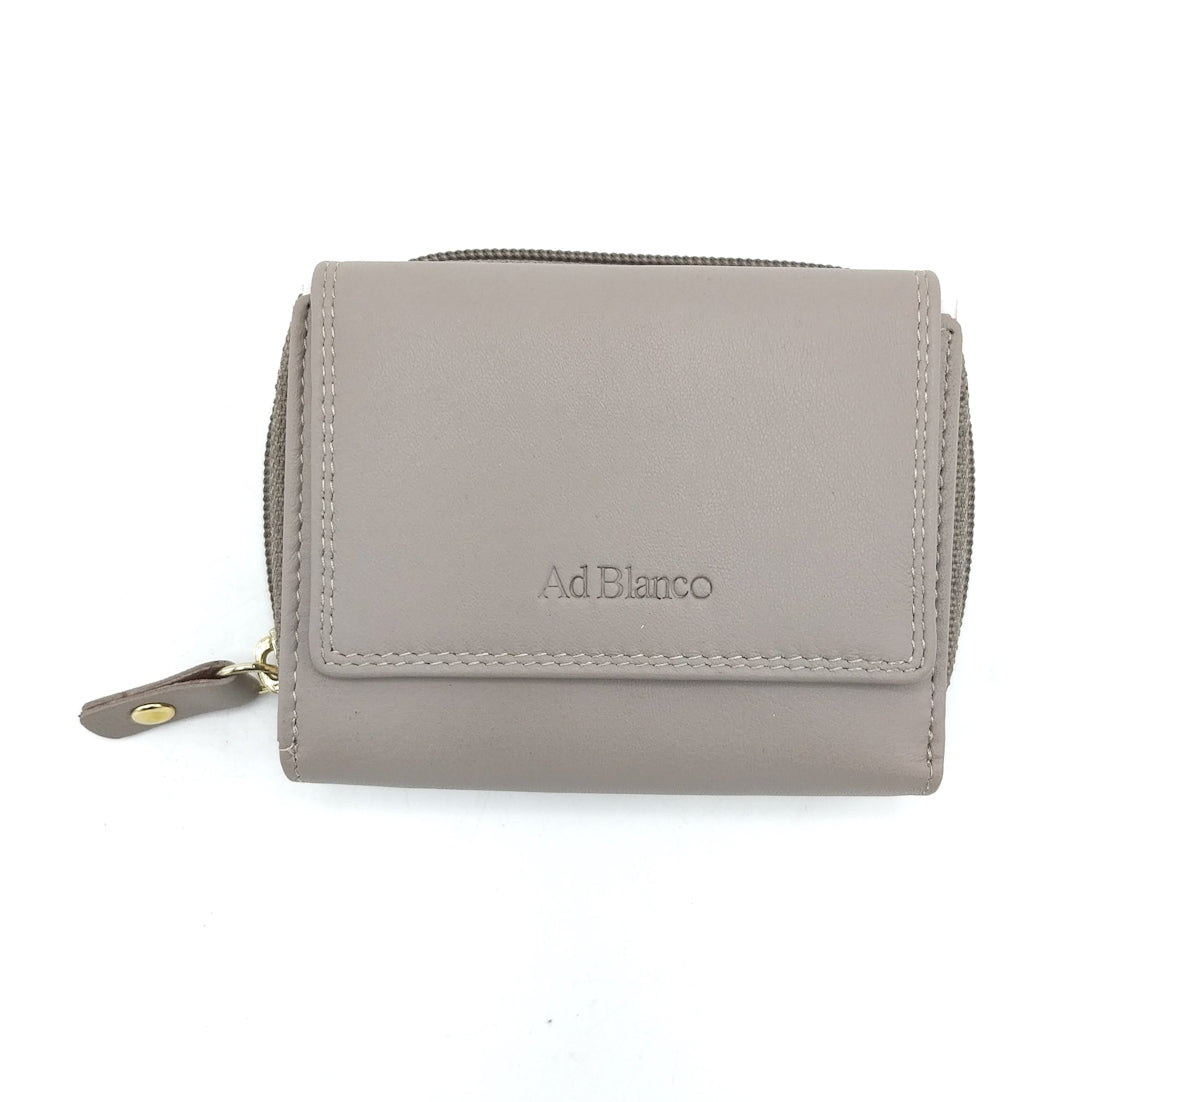 Genuine leather wallet, Ad Blanco, art. 6770.422